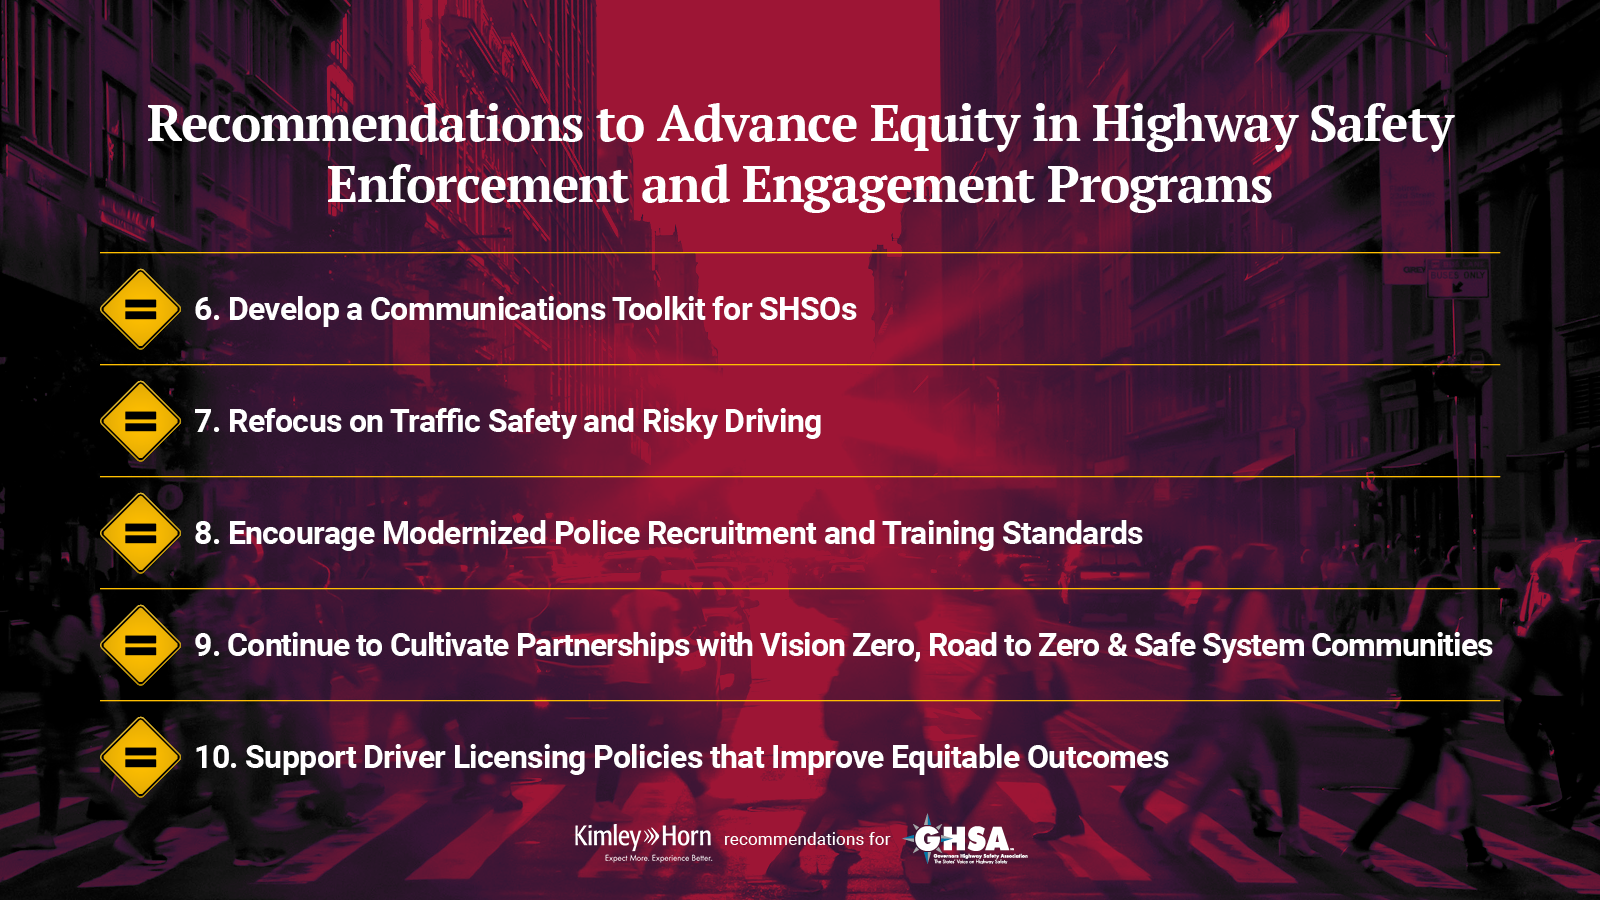 Recommendations to Advance Equity in Highway Safety Enforcement and Engagement Programs 2